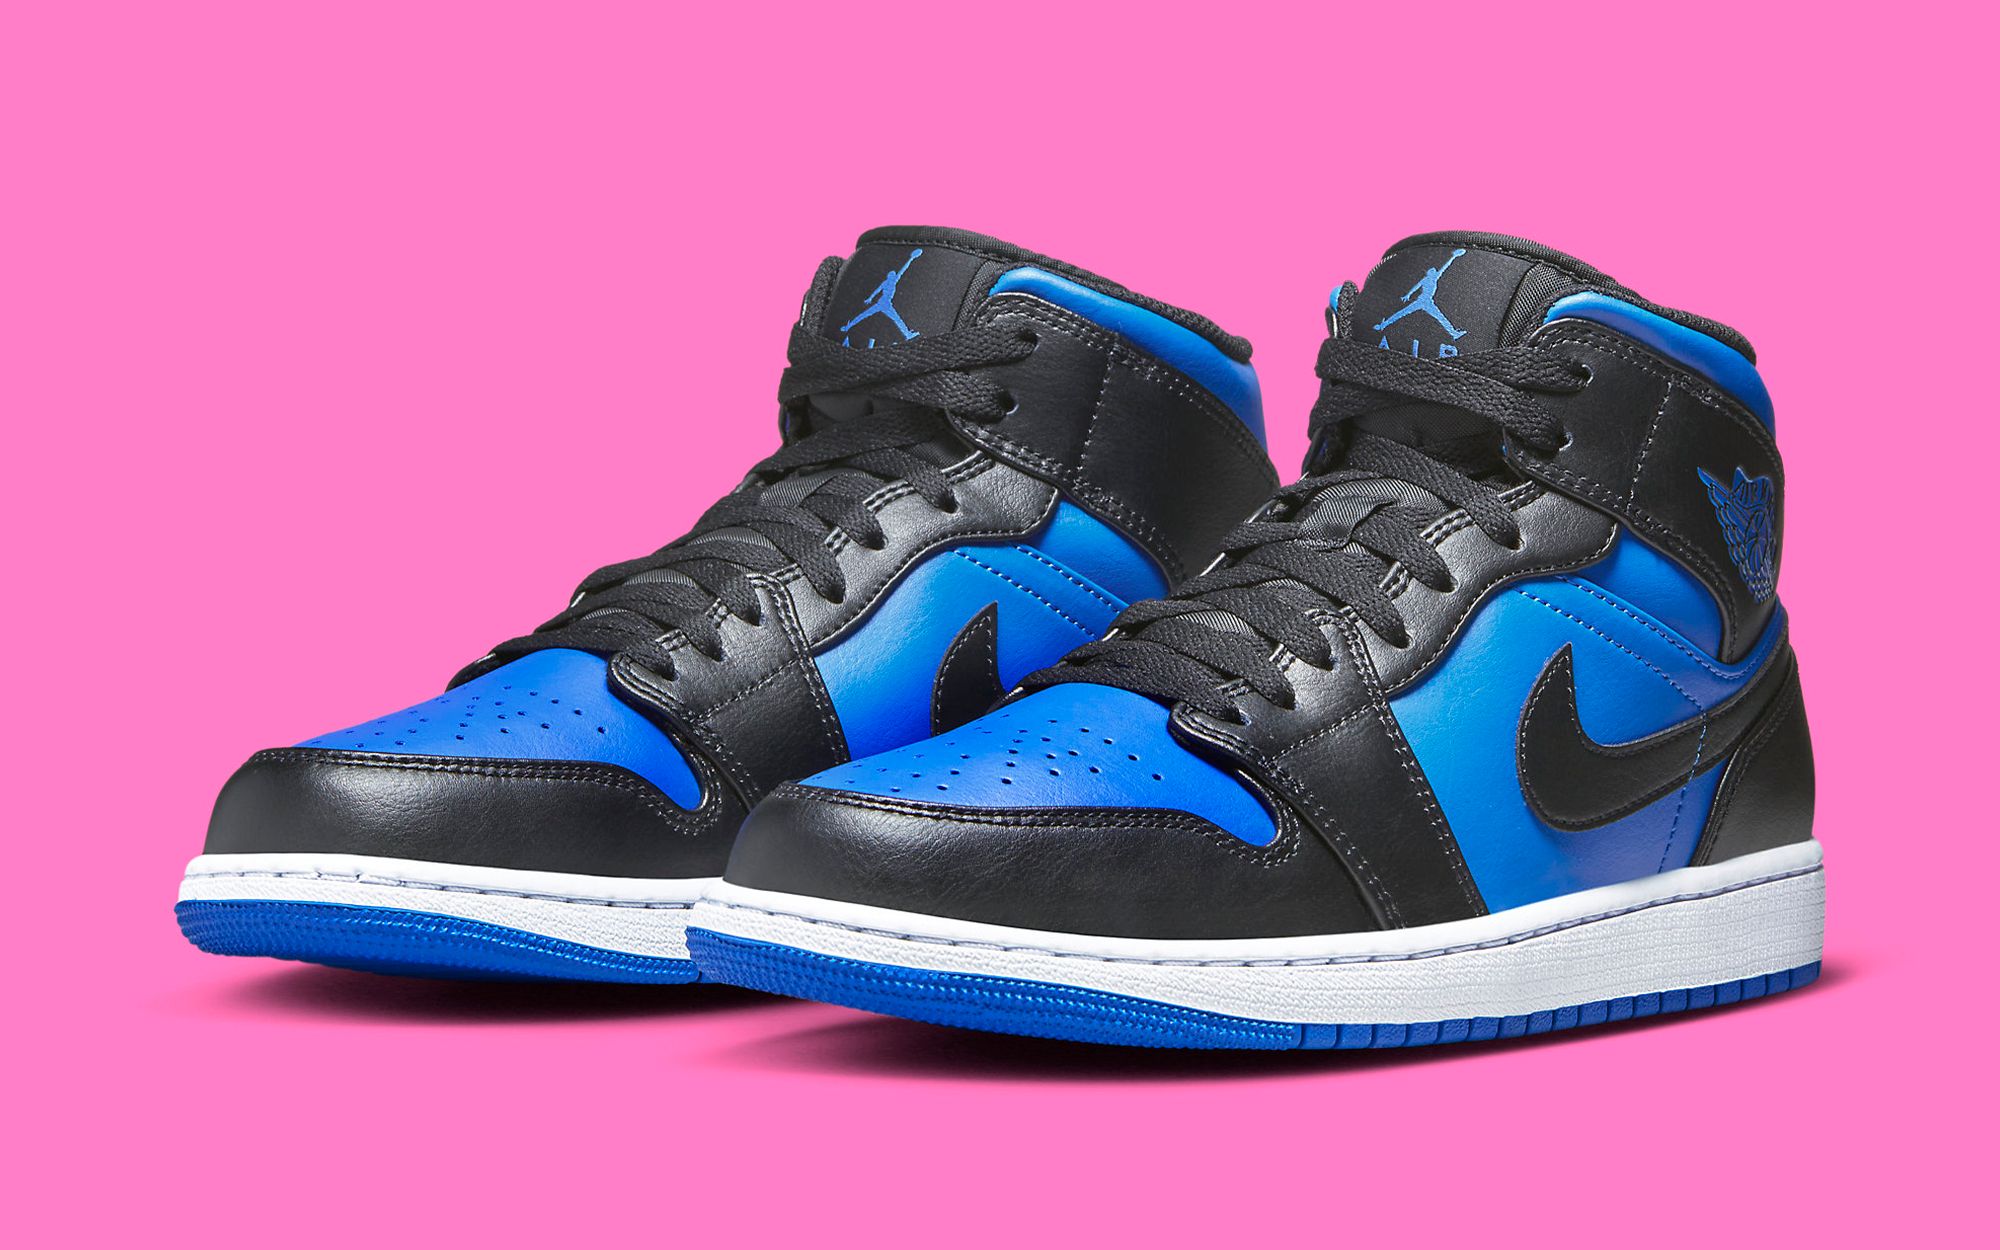 The Air Jordan 1 Mid is Available Now in Royal and Black | House ...